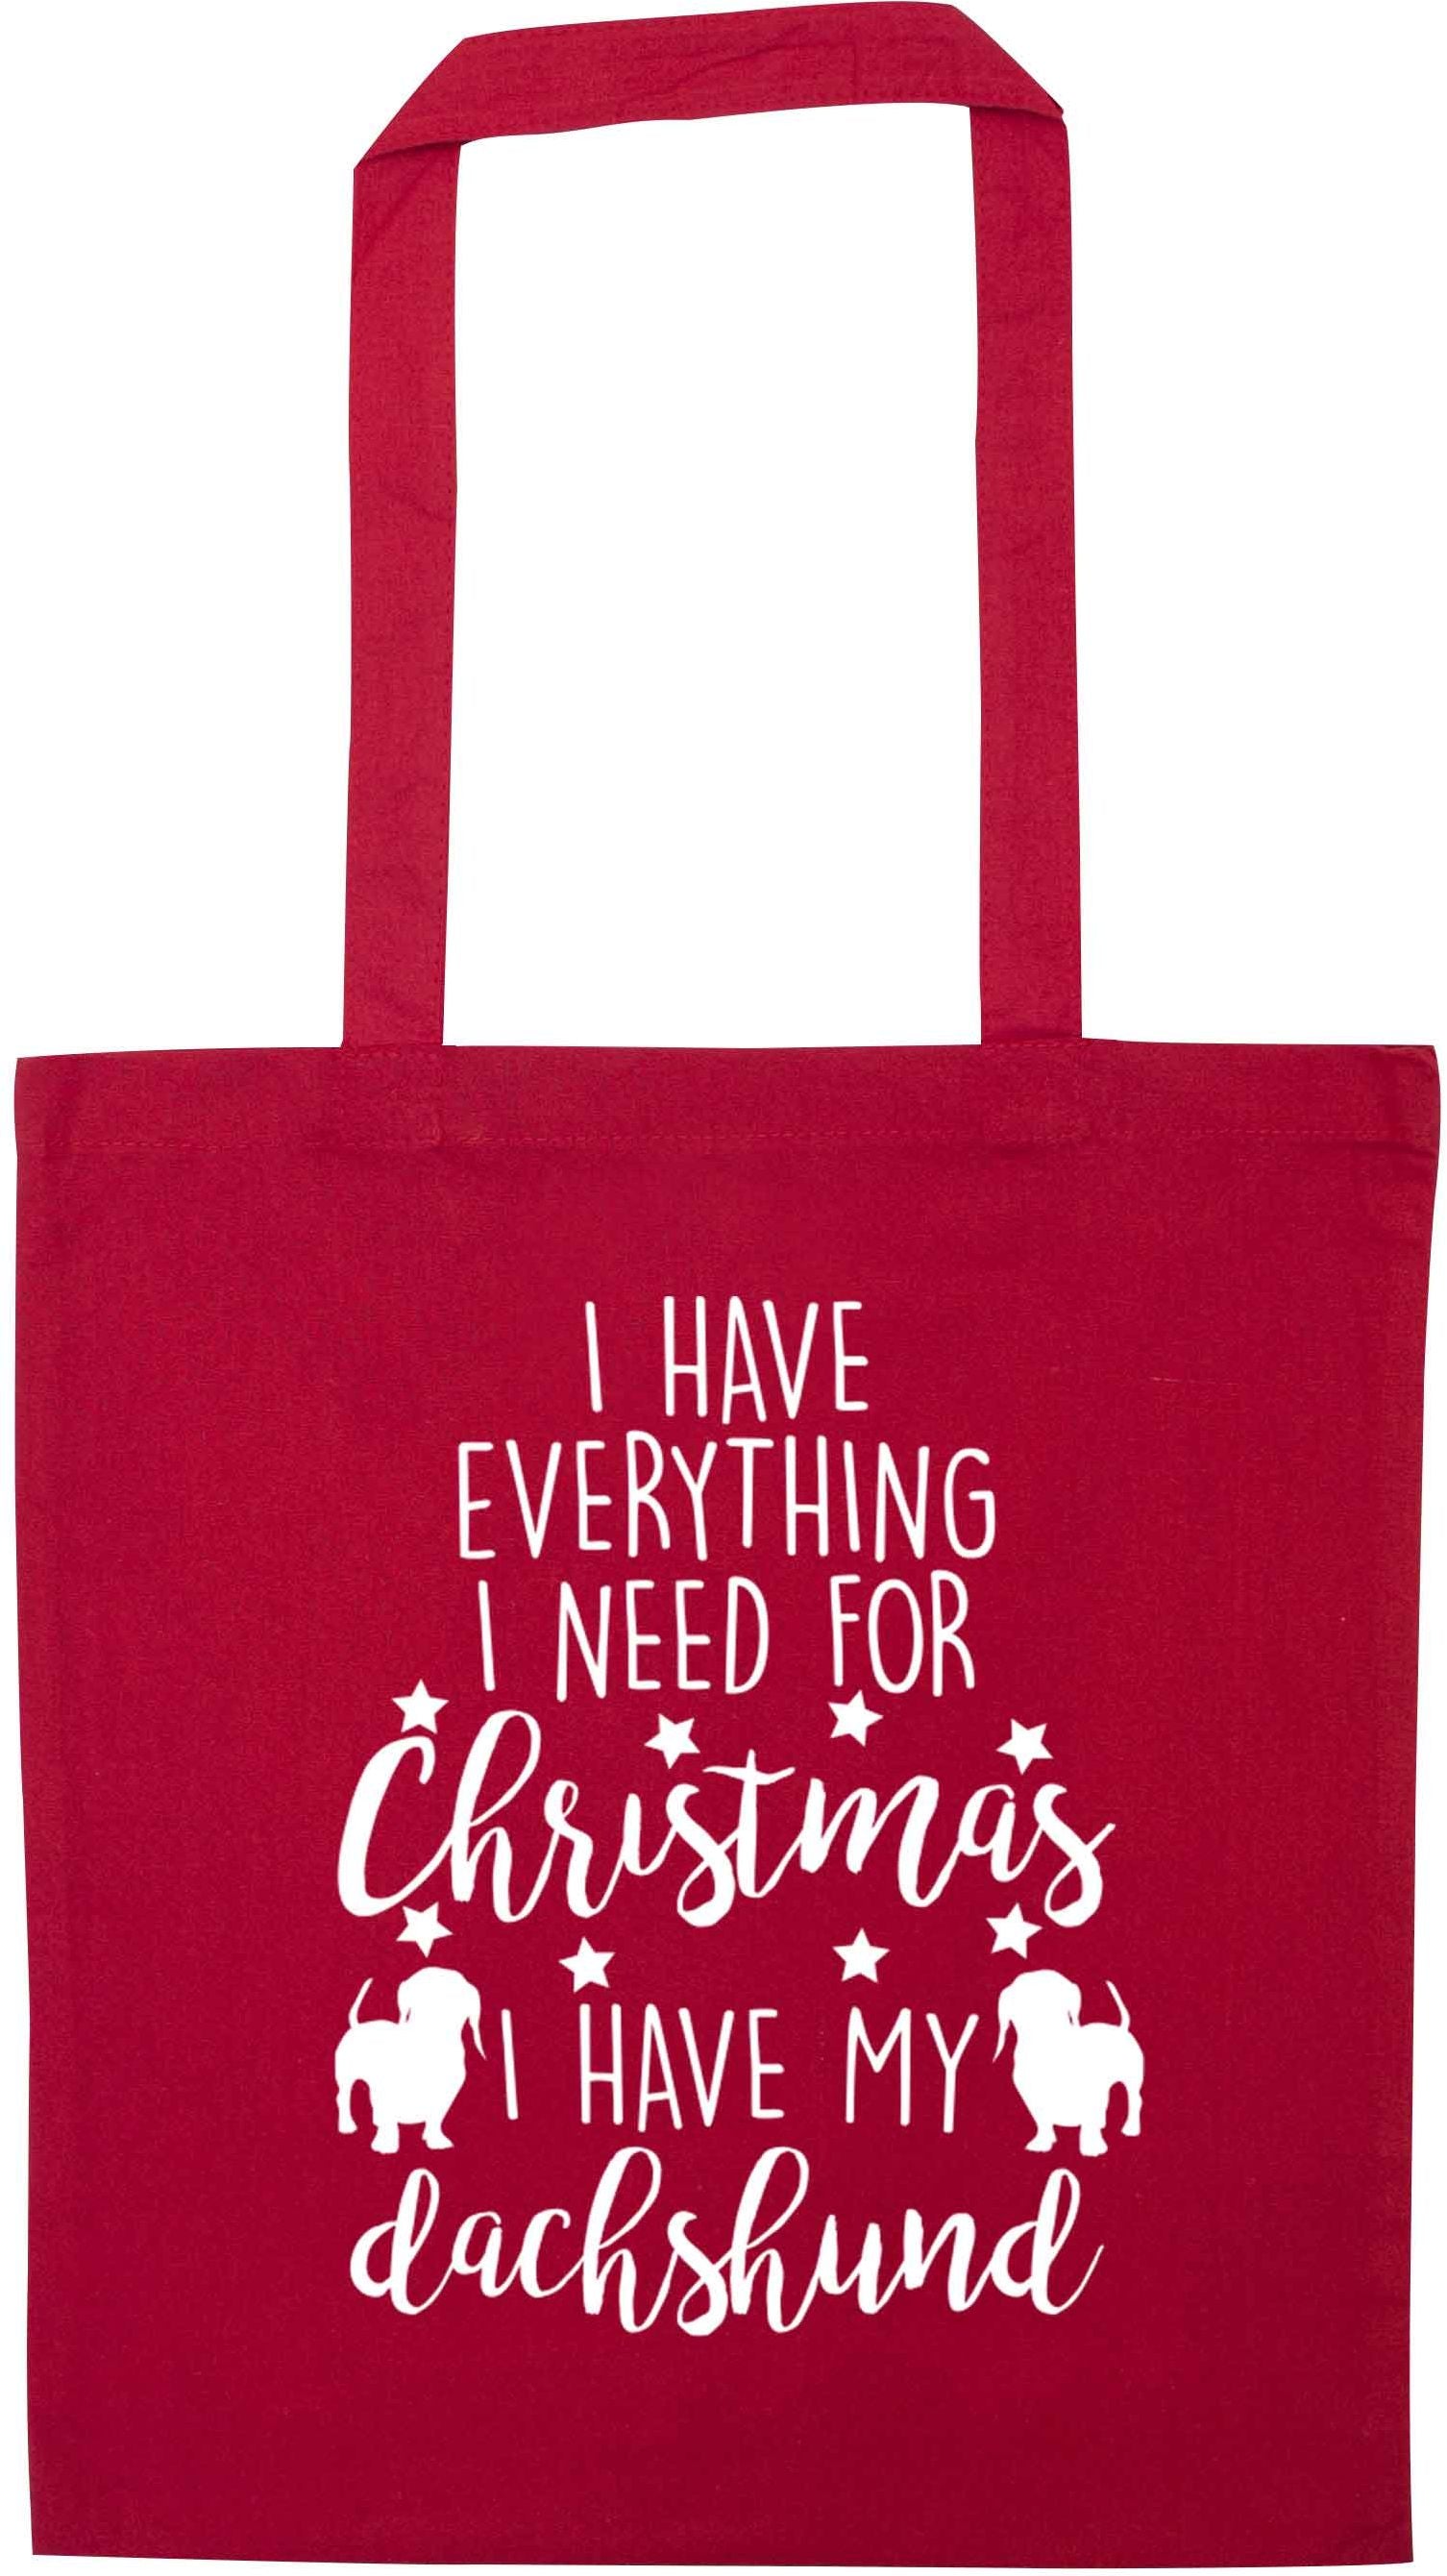 I have everything I need for Christmas I have my dachshund red tote bag